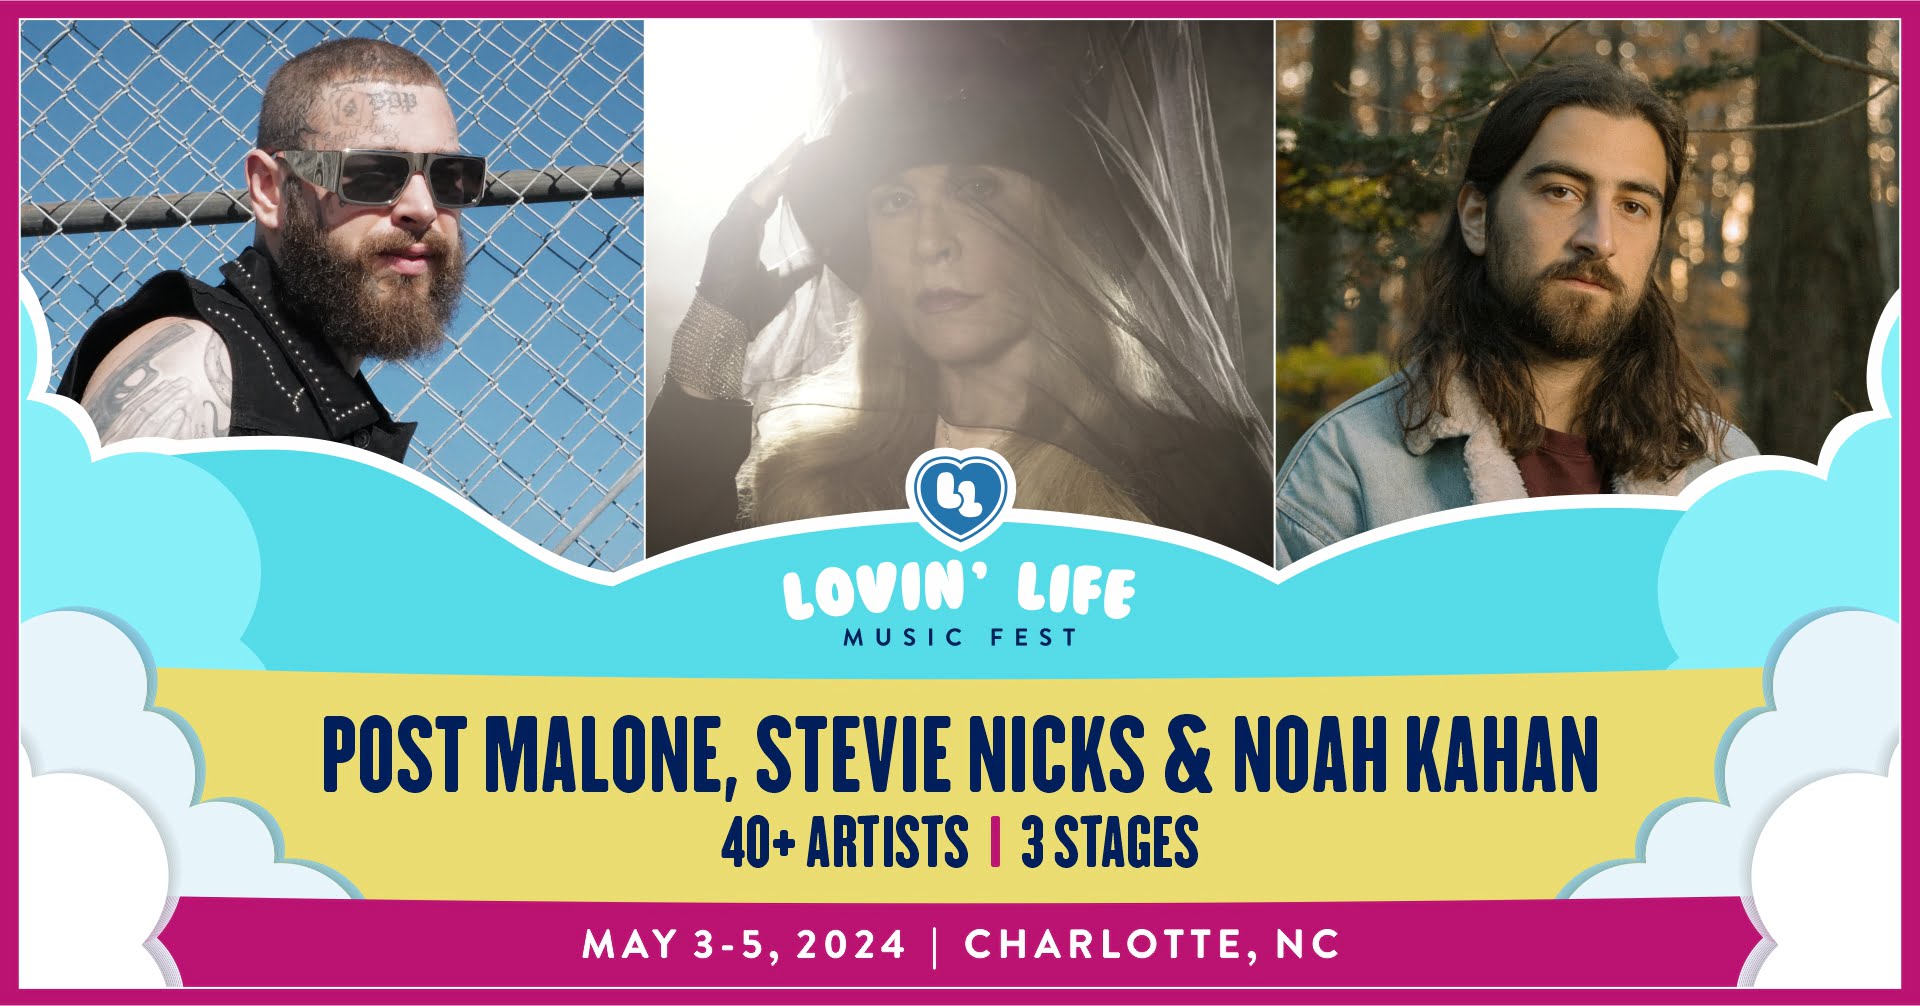 When will the lineup be announced? | Lovin' Life Music Fest